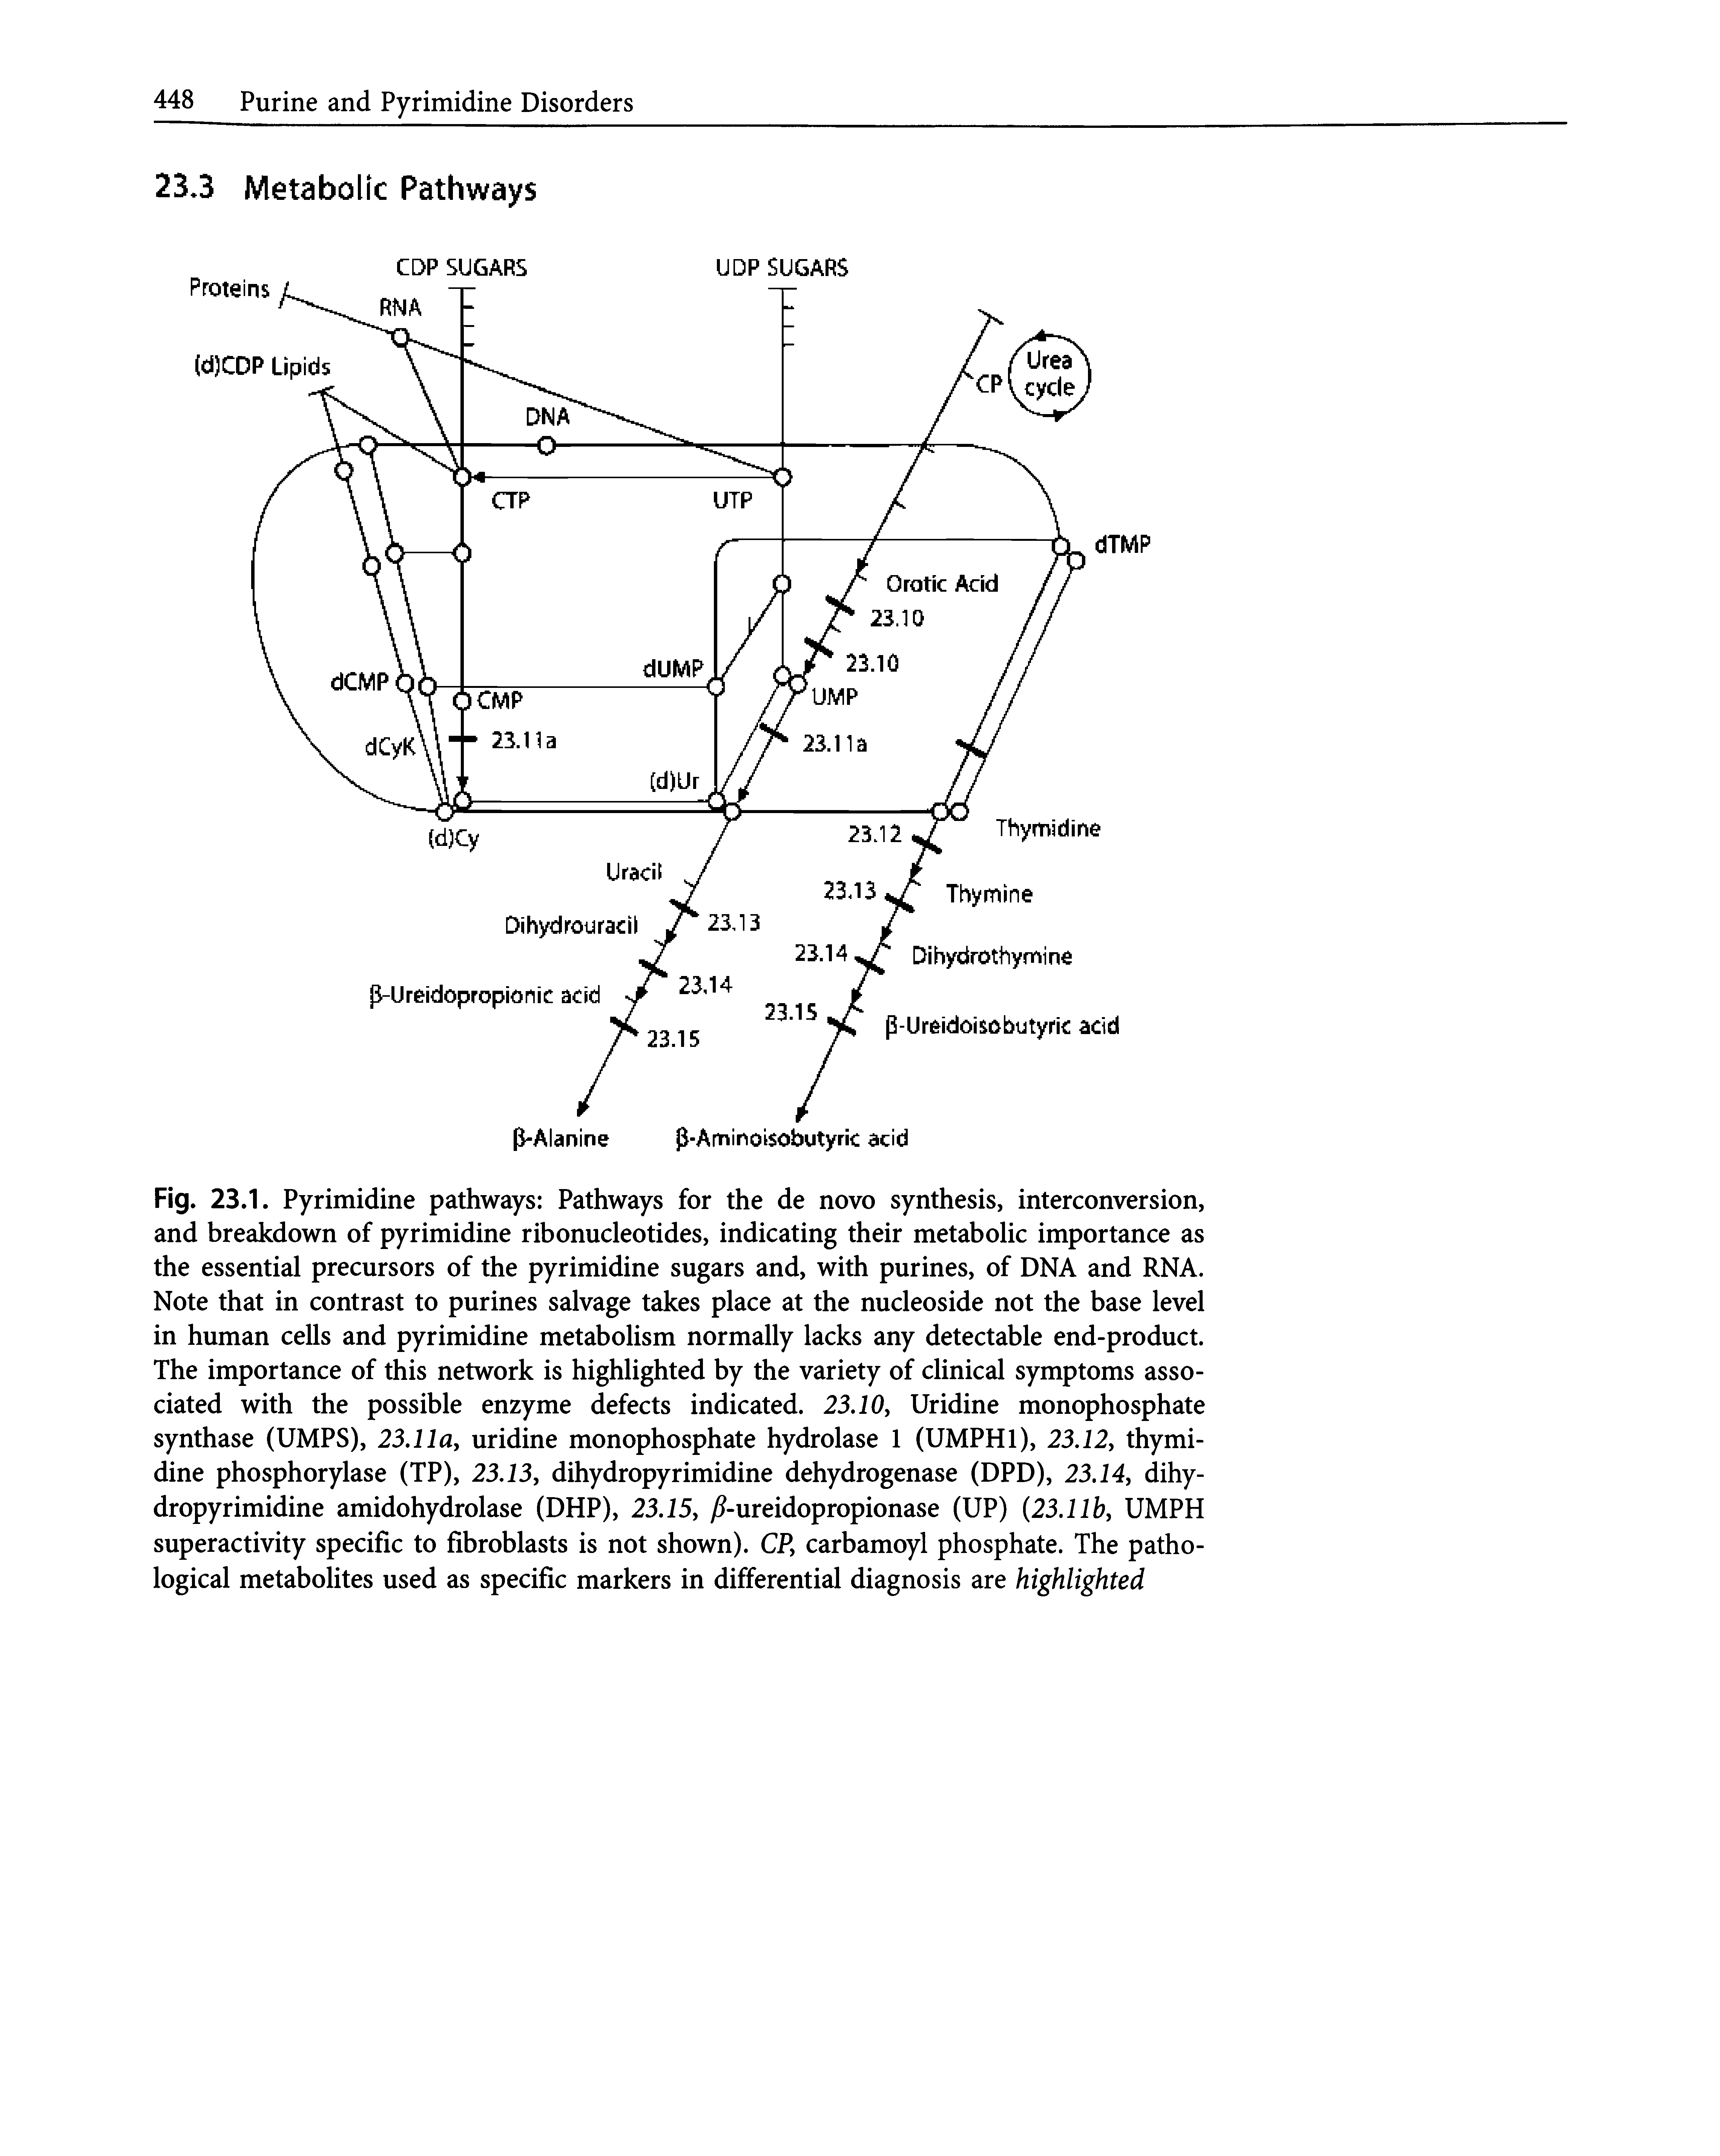 Fig. 23.1. Pyrimidine pathways Pathways for the de novo synthesis, interconversion, and breakdown of pyrimidine ribonucleotides, indicating their metabolic importance as the essential precursors of the pyrimidine sugars and, with purines, of DNA and RNA. Note that in contrast to purines salvage takes place at the nucleoside not the base level in human cells and pyrimidine metabolism normally lacks any detectable end-product. The importance of this network is highlighted by the variety of clinical symptoms associated with the possible enzyme defects indicated. 23.10, Uridine monophosphate synthase (UMPS), 23.11a, uridine monophosphate hydrolase 1 (UMPHl), 23.12, thymidine phosphorylase (TP), 23.13, dihydropyrimidine dehydrogenase (DPD), 23.14, dihydropyrimidine amidohydrolase (DHP), 23.15, y -ureidopropionase (UP) (23.11b, UMPH superactivity specific to fibroblasts is not shown). CP, carbamoyl phosphate. The pathological metabolites used as specific markers in differential diagnosis are highlighted...